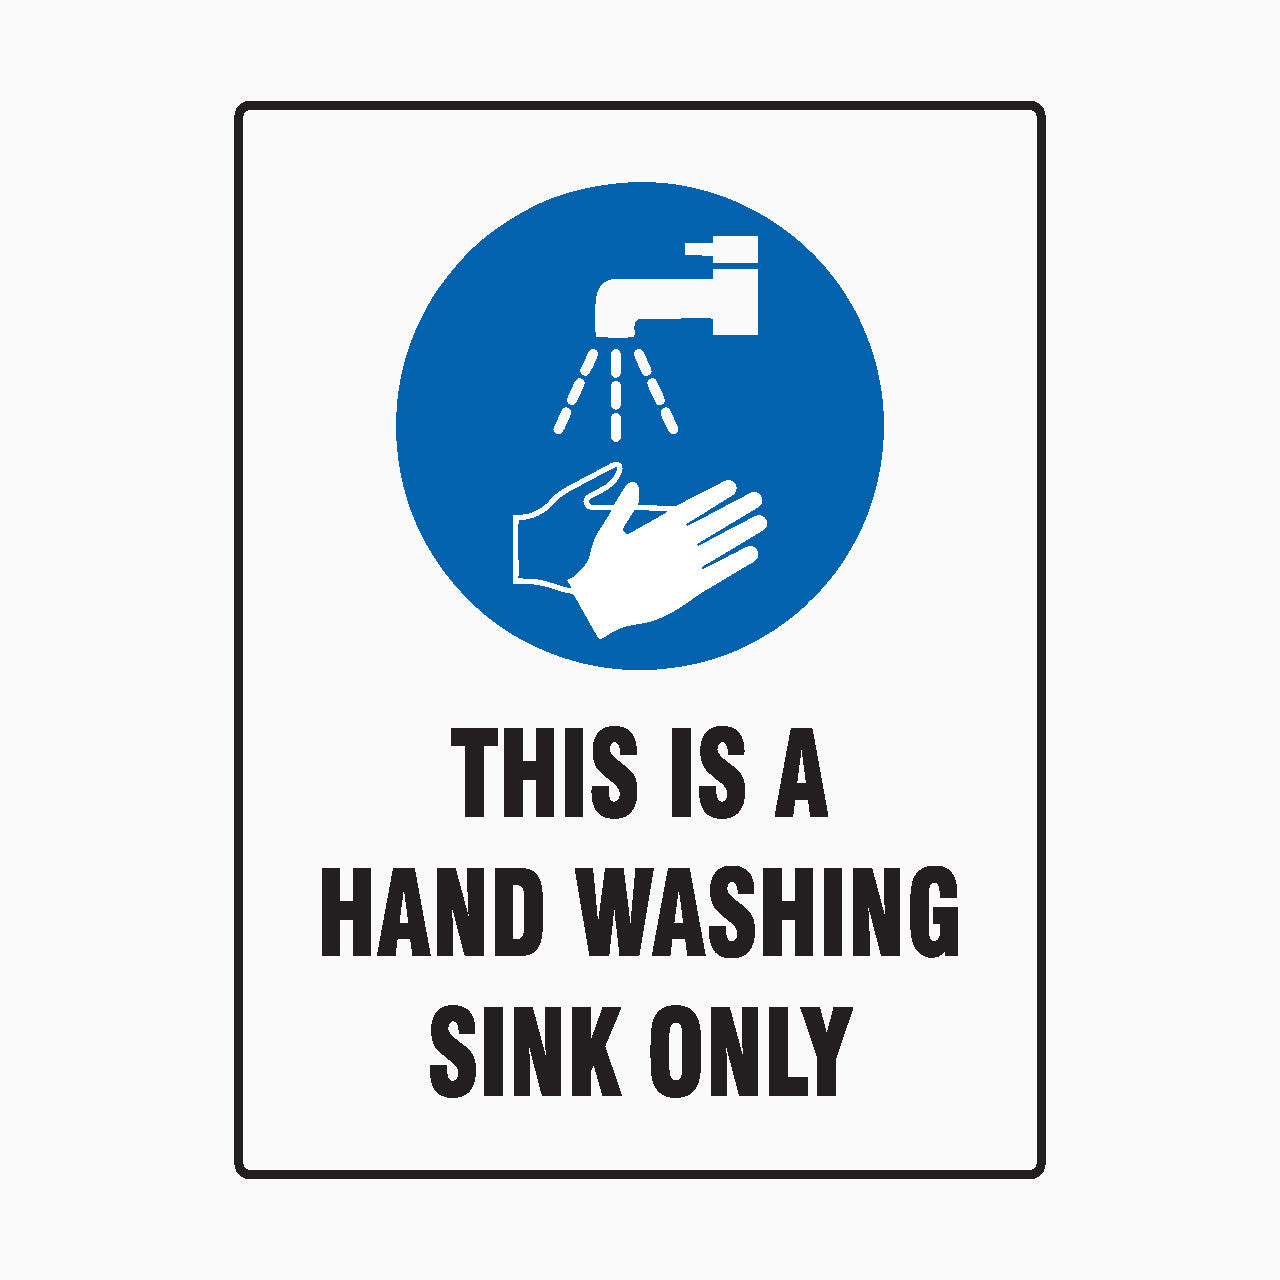 THIS IS A HAND WASHING SINK ONLY SIG - Mandatory Signs